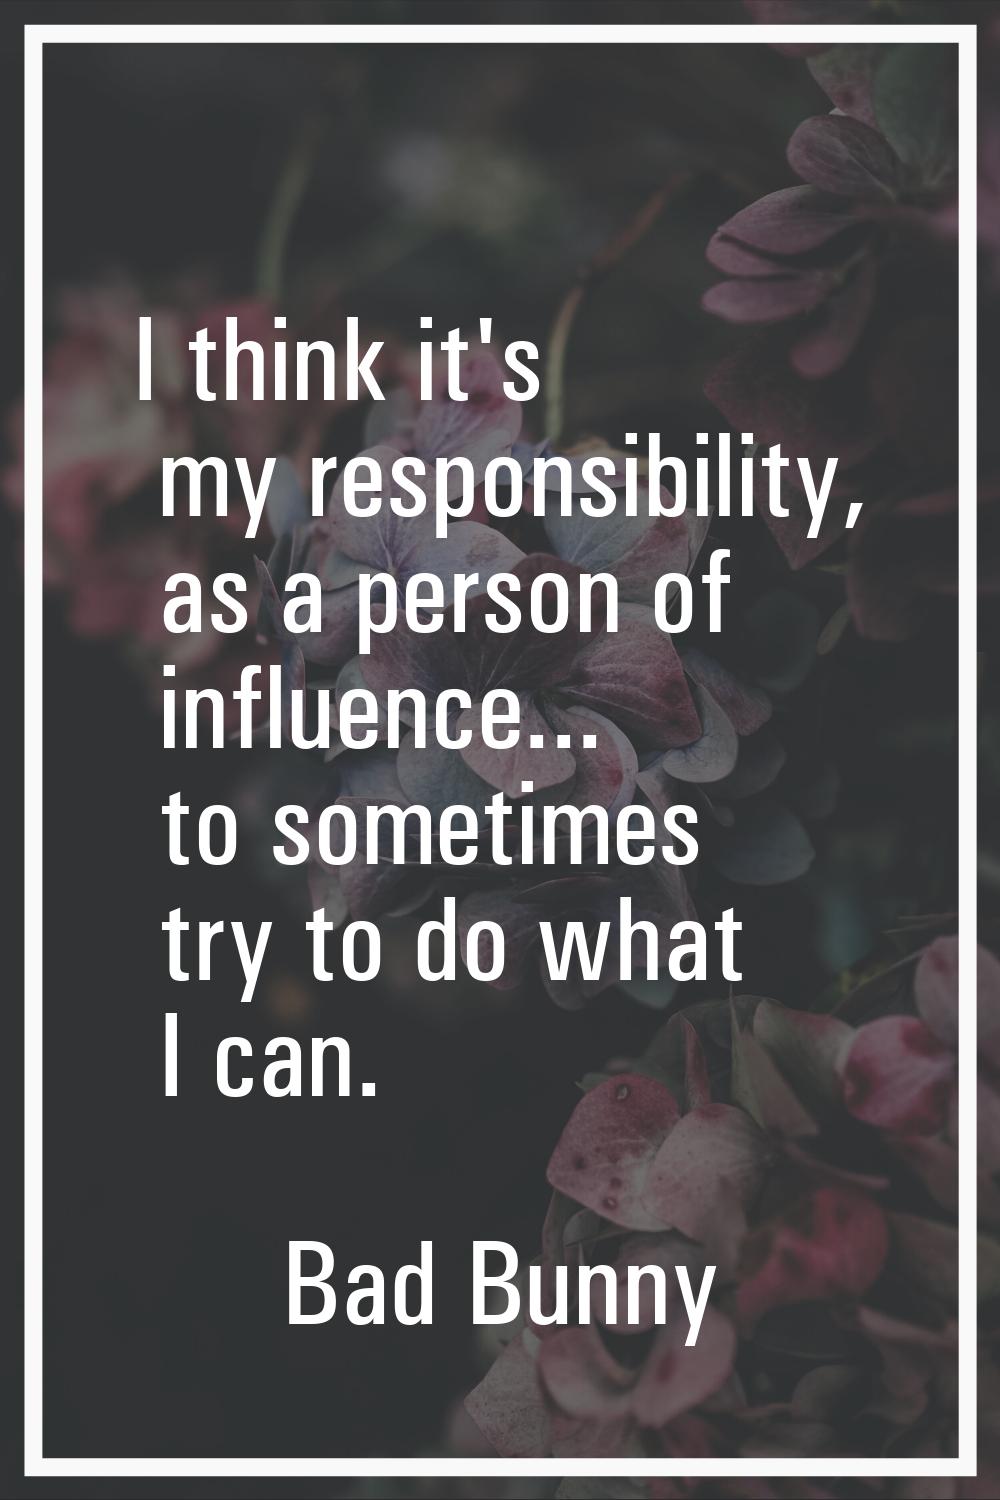 I think it's my responsibility, as a person of influence... to sometimes try to do what I can.